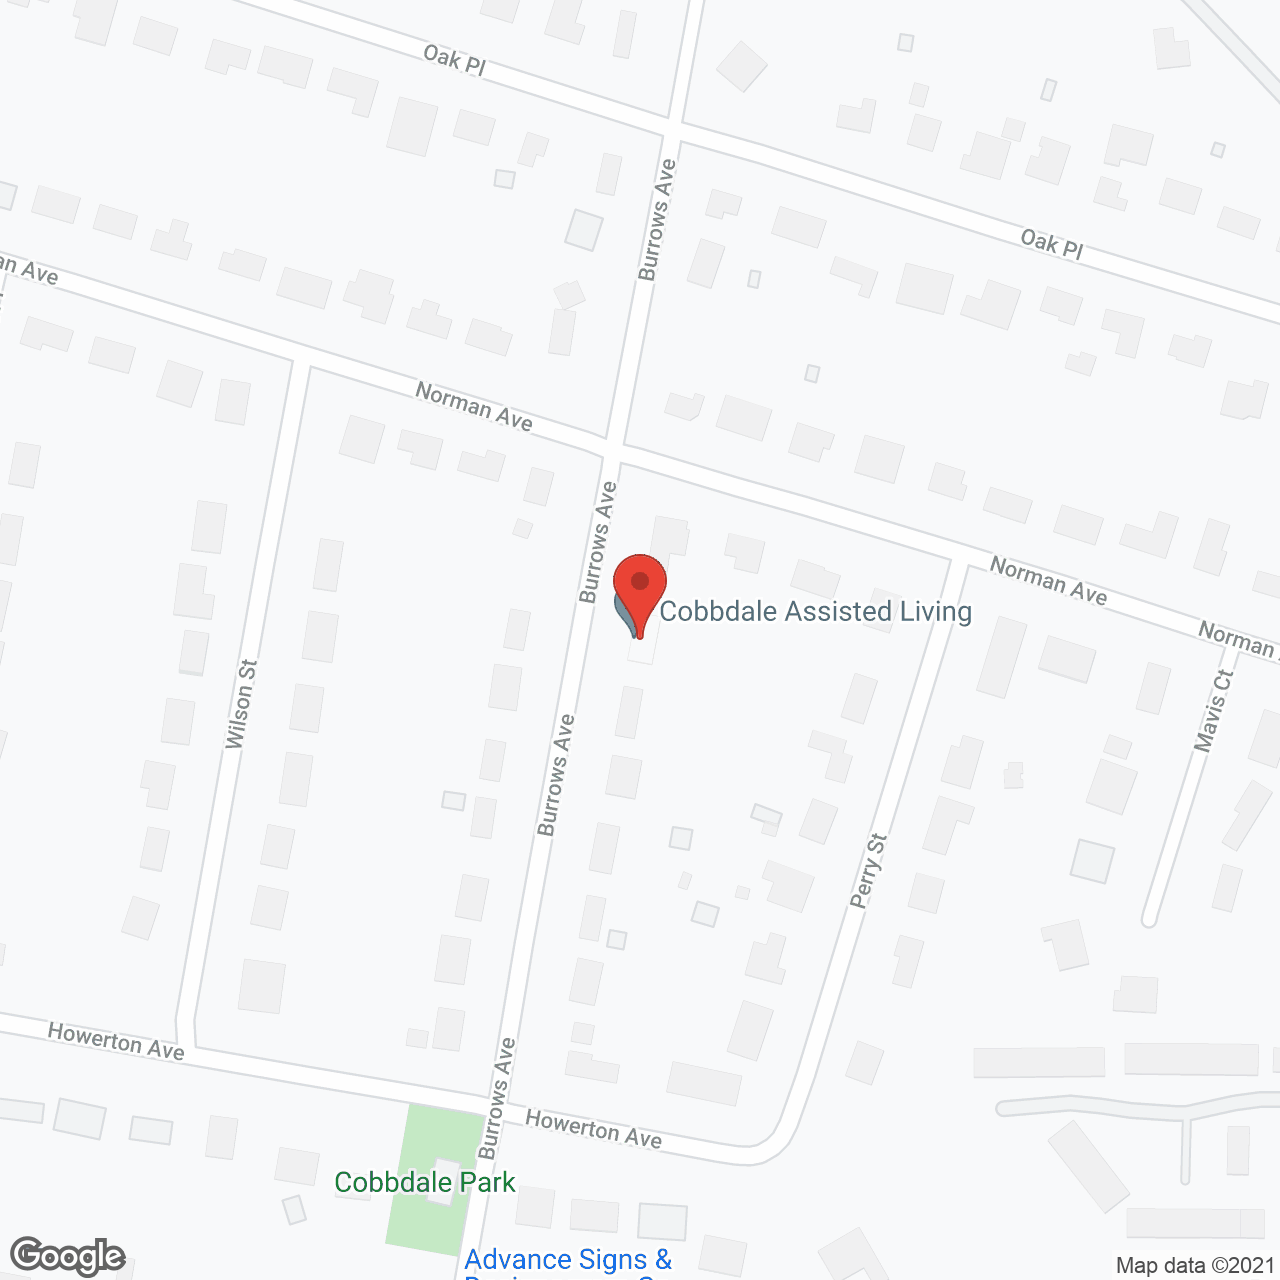 Cobbdale Assisted Living in google map